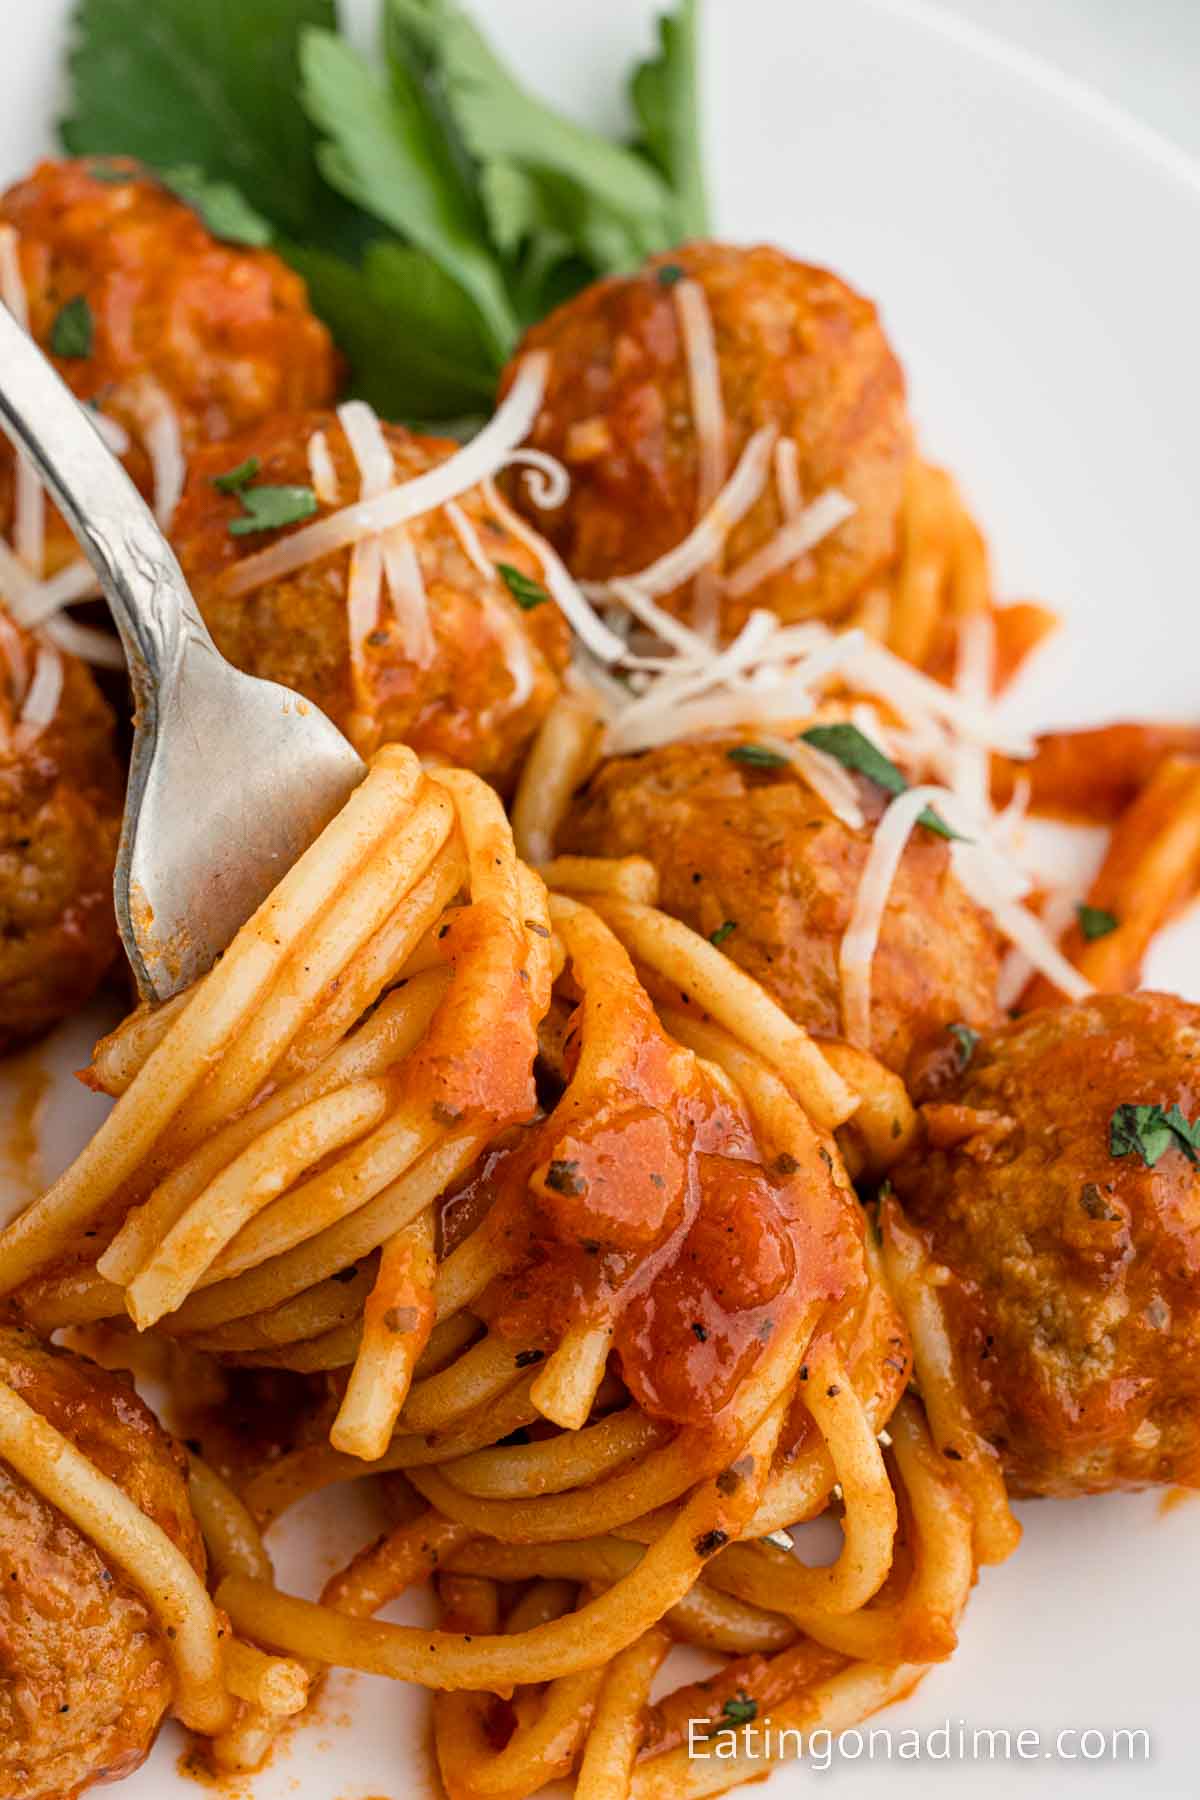 Spaghetti and Meatballs on a plate with a side of salad